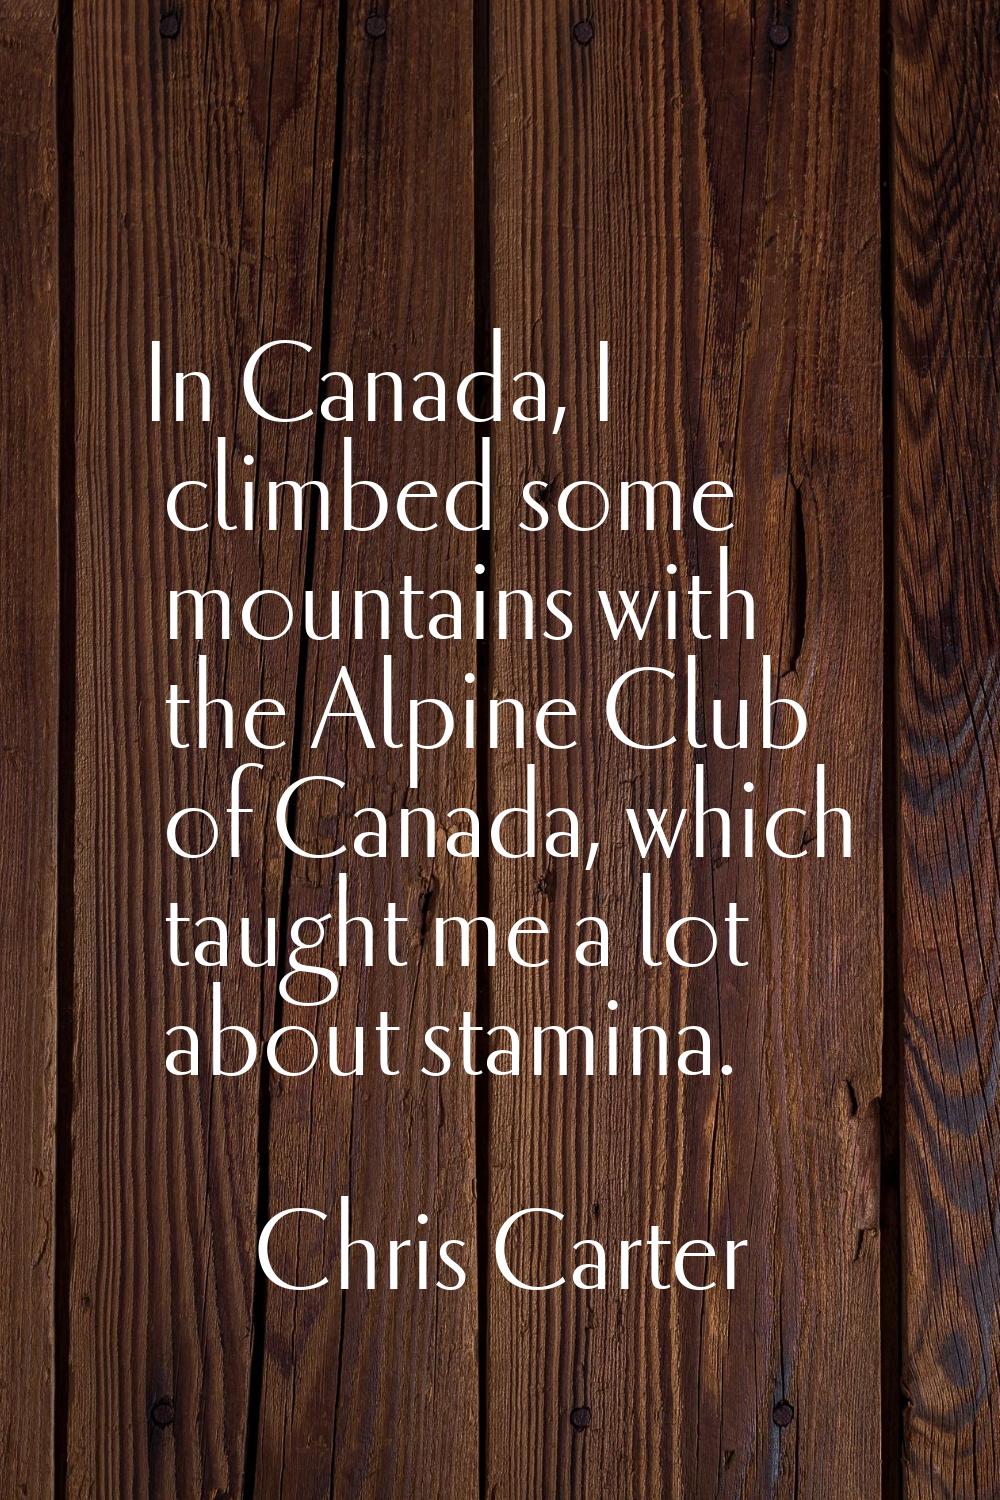 In Canada, I climbed some mountains with the Alpine Club of Canada, which taught me a lot about sta